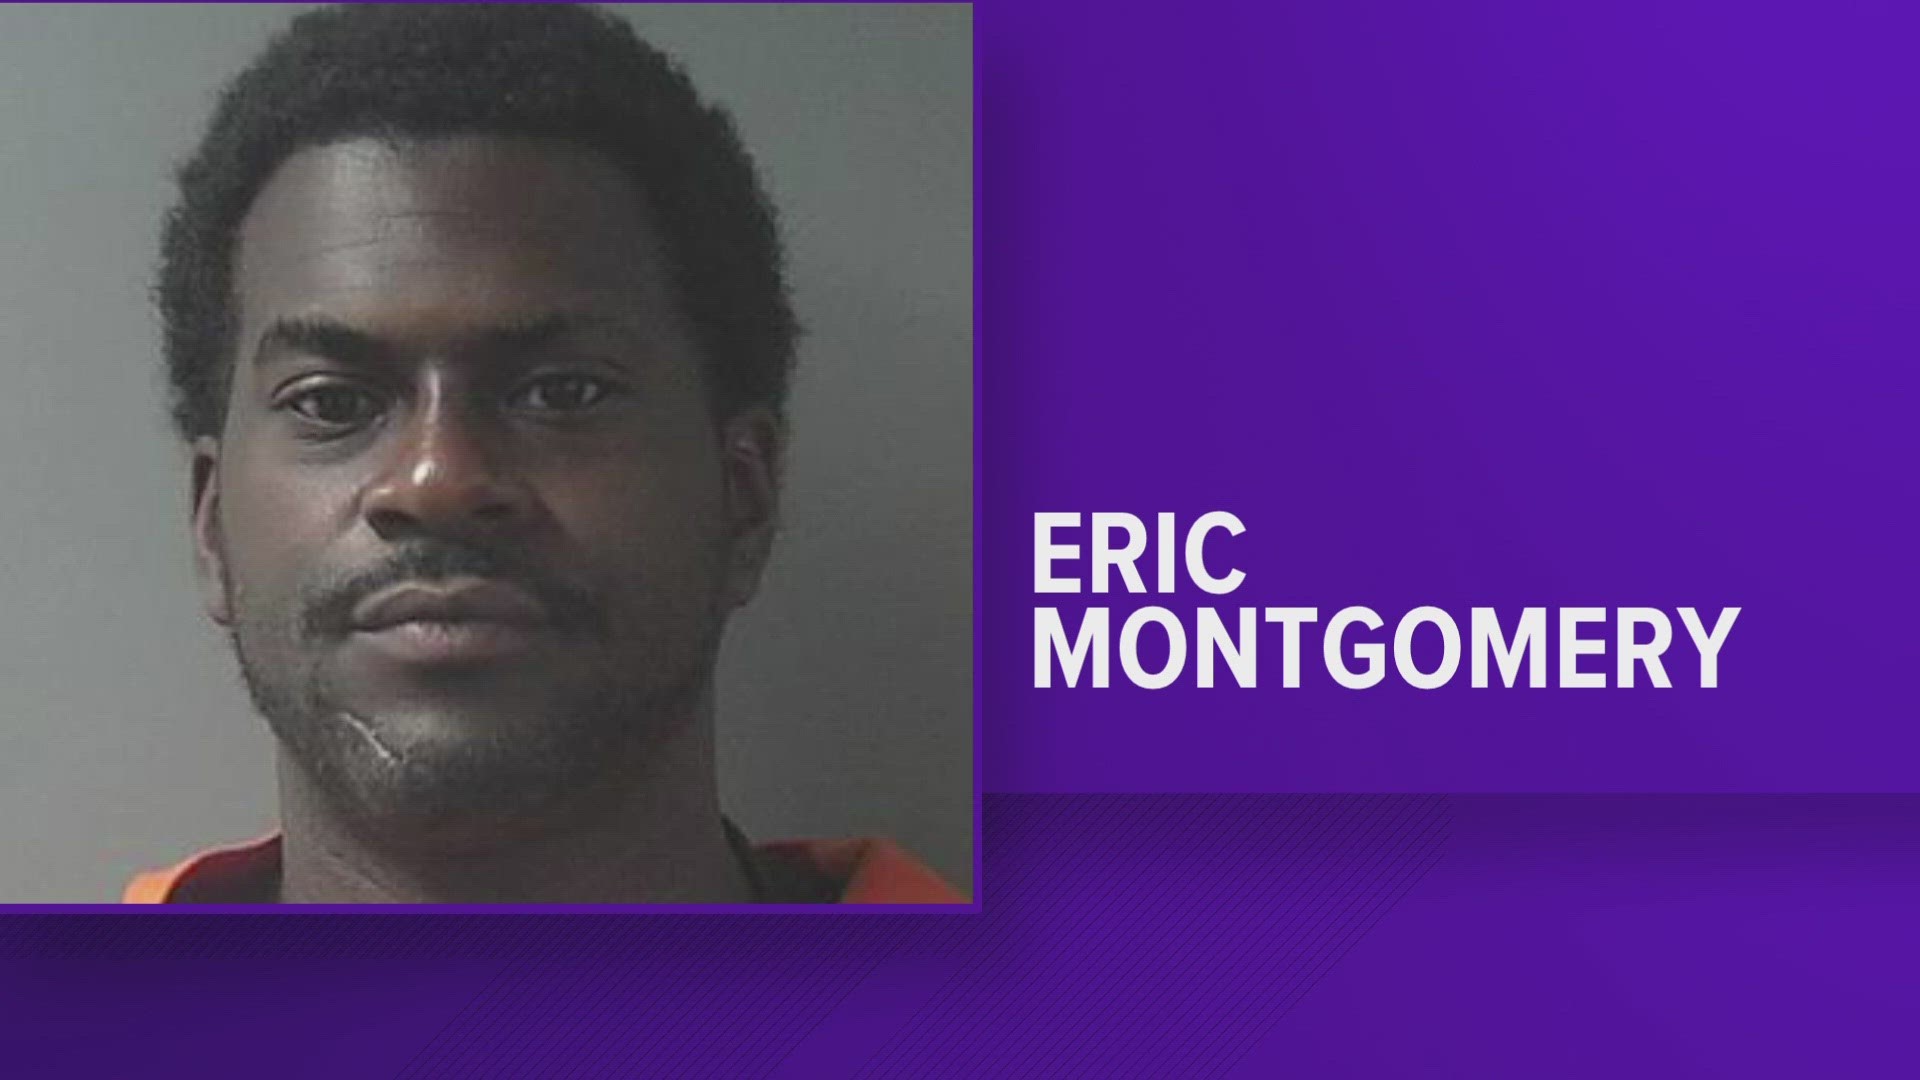 Police say Eric Montgomery assaulted 20-year-old "Avery McMillan" in a parking garage.